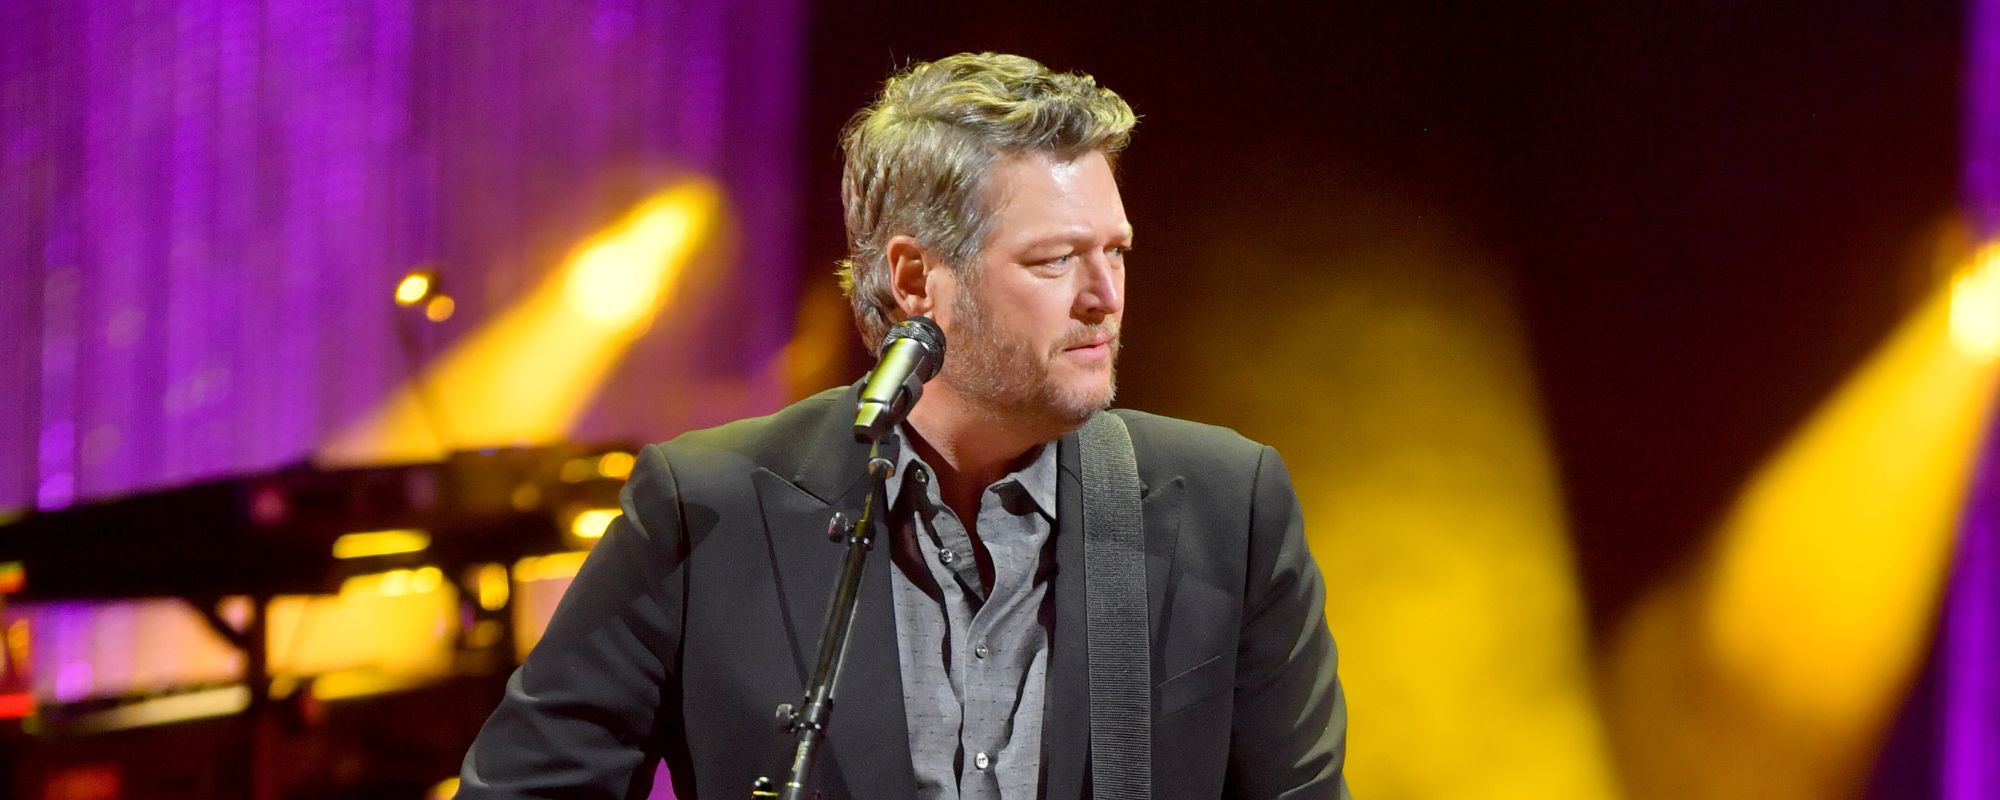 Blake Shelton Delivers Rousing Performance of “Honey Bee”; Vince Gill, Ronnie Dunn, & More Join Oklahoma Show